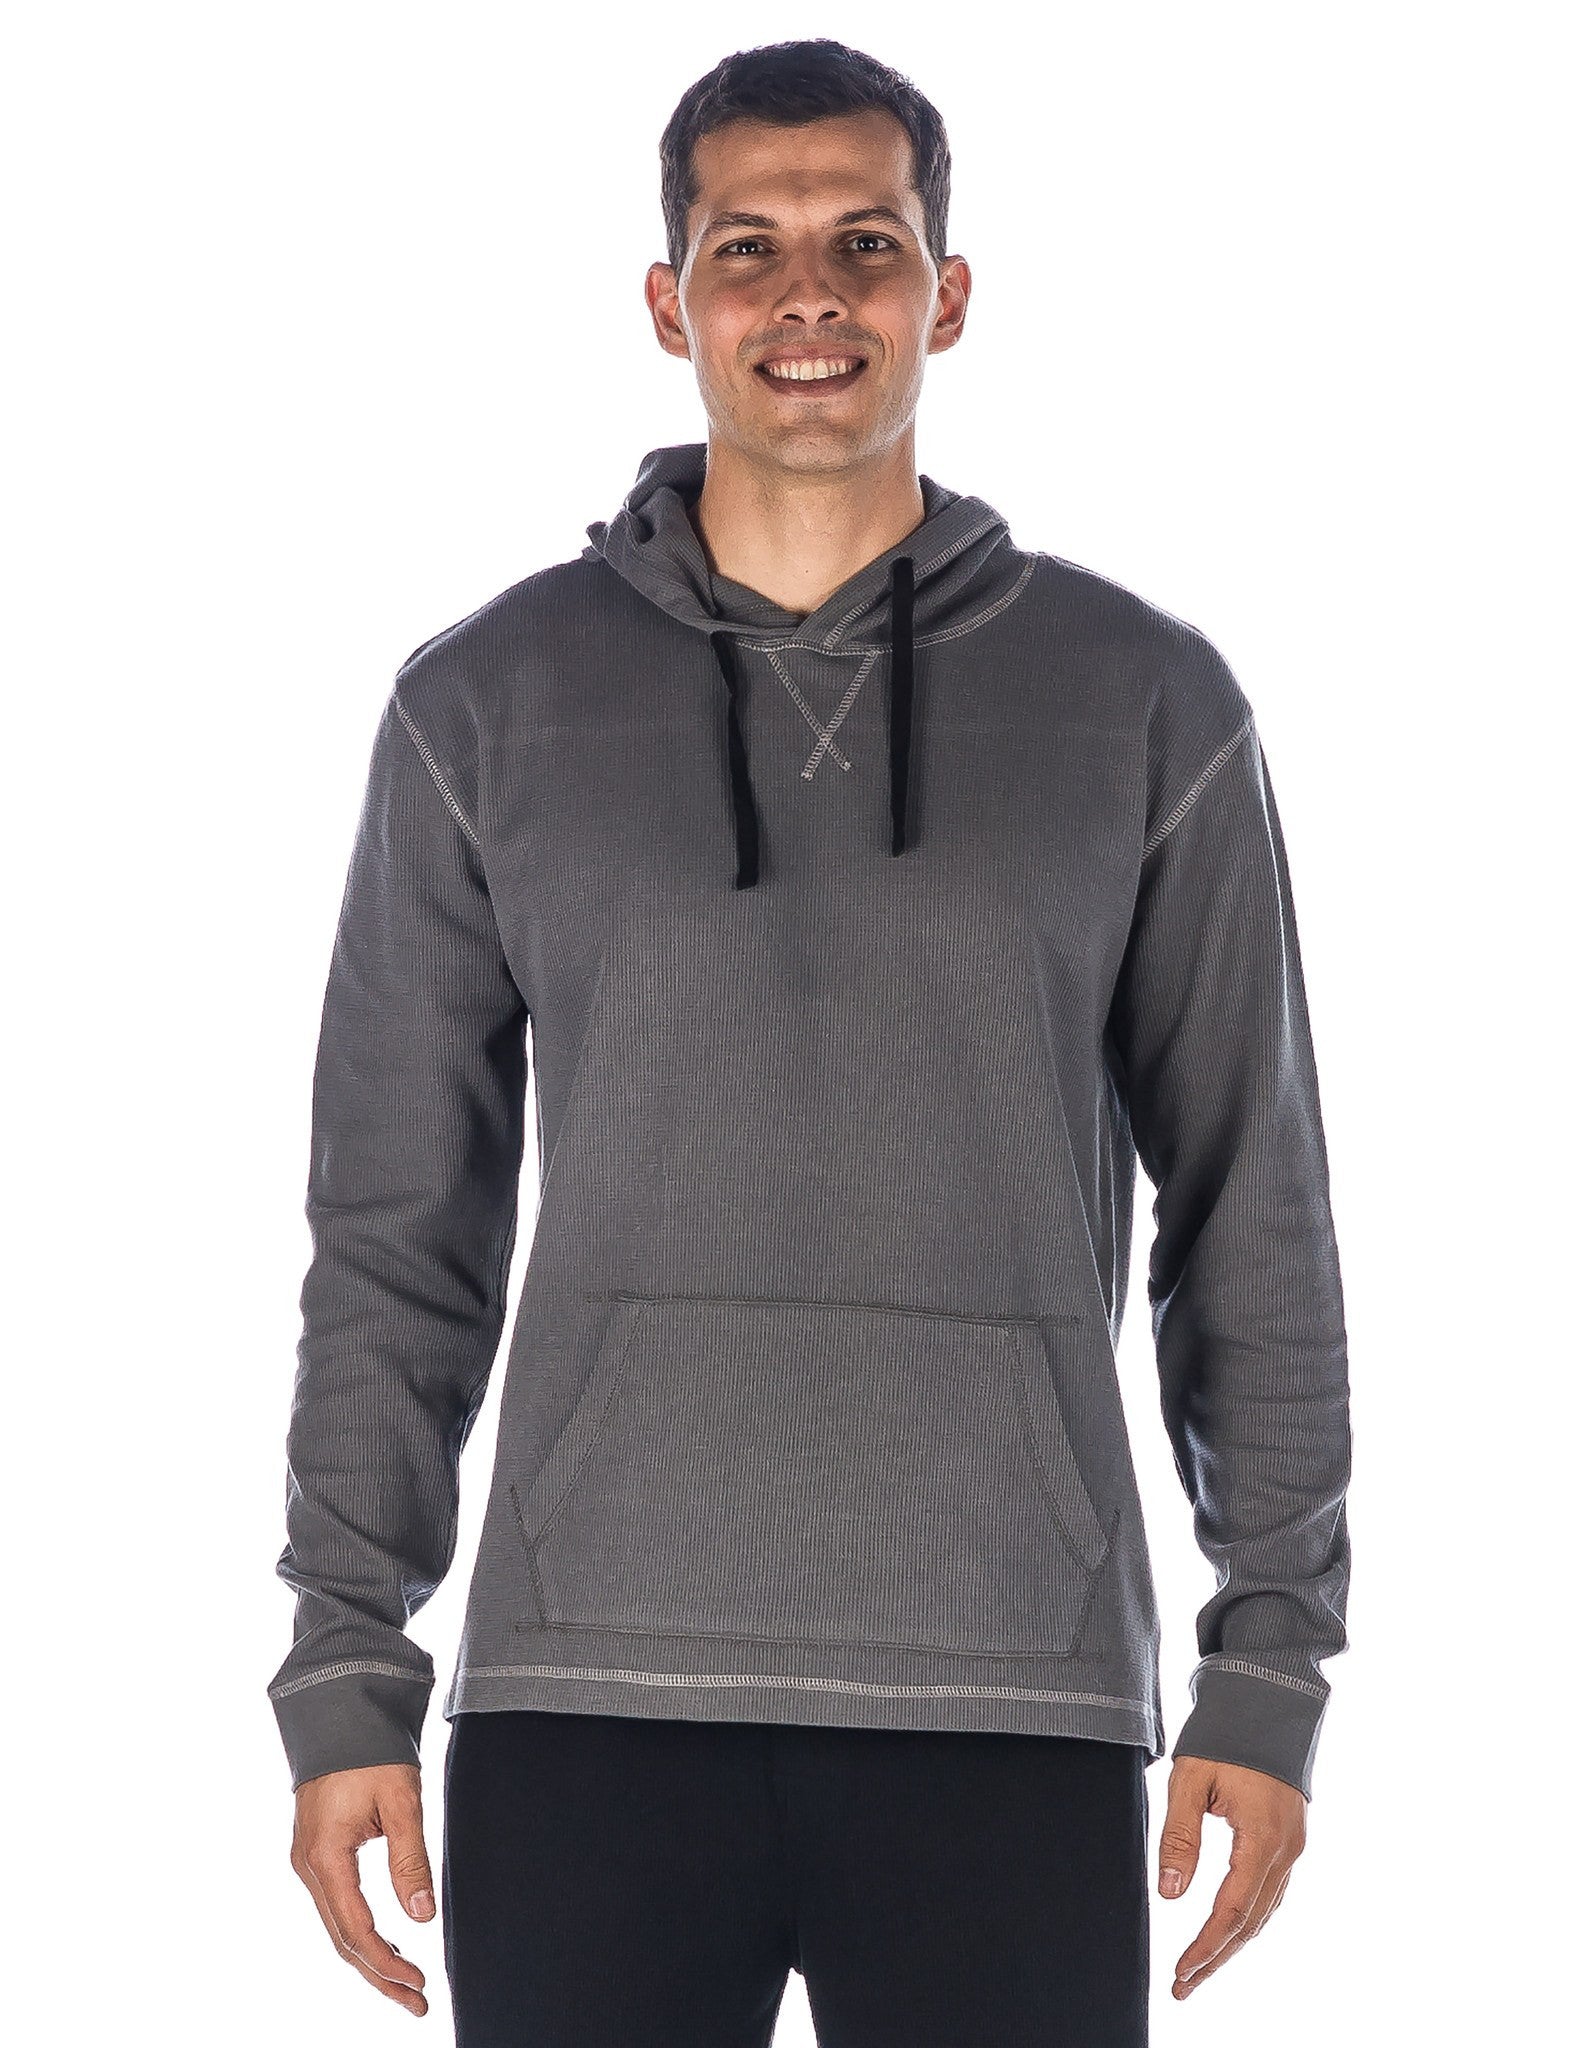 Men's Solid Thermal Lounge Hoodie - with Contrast Stitching